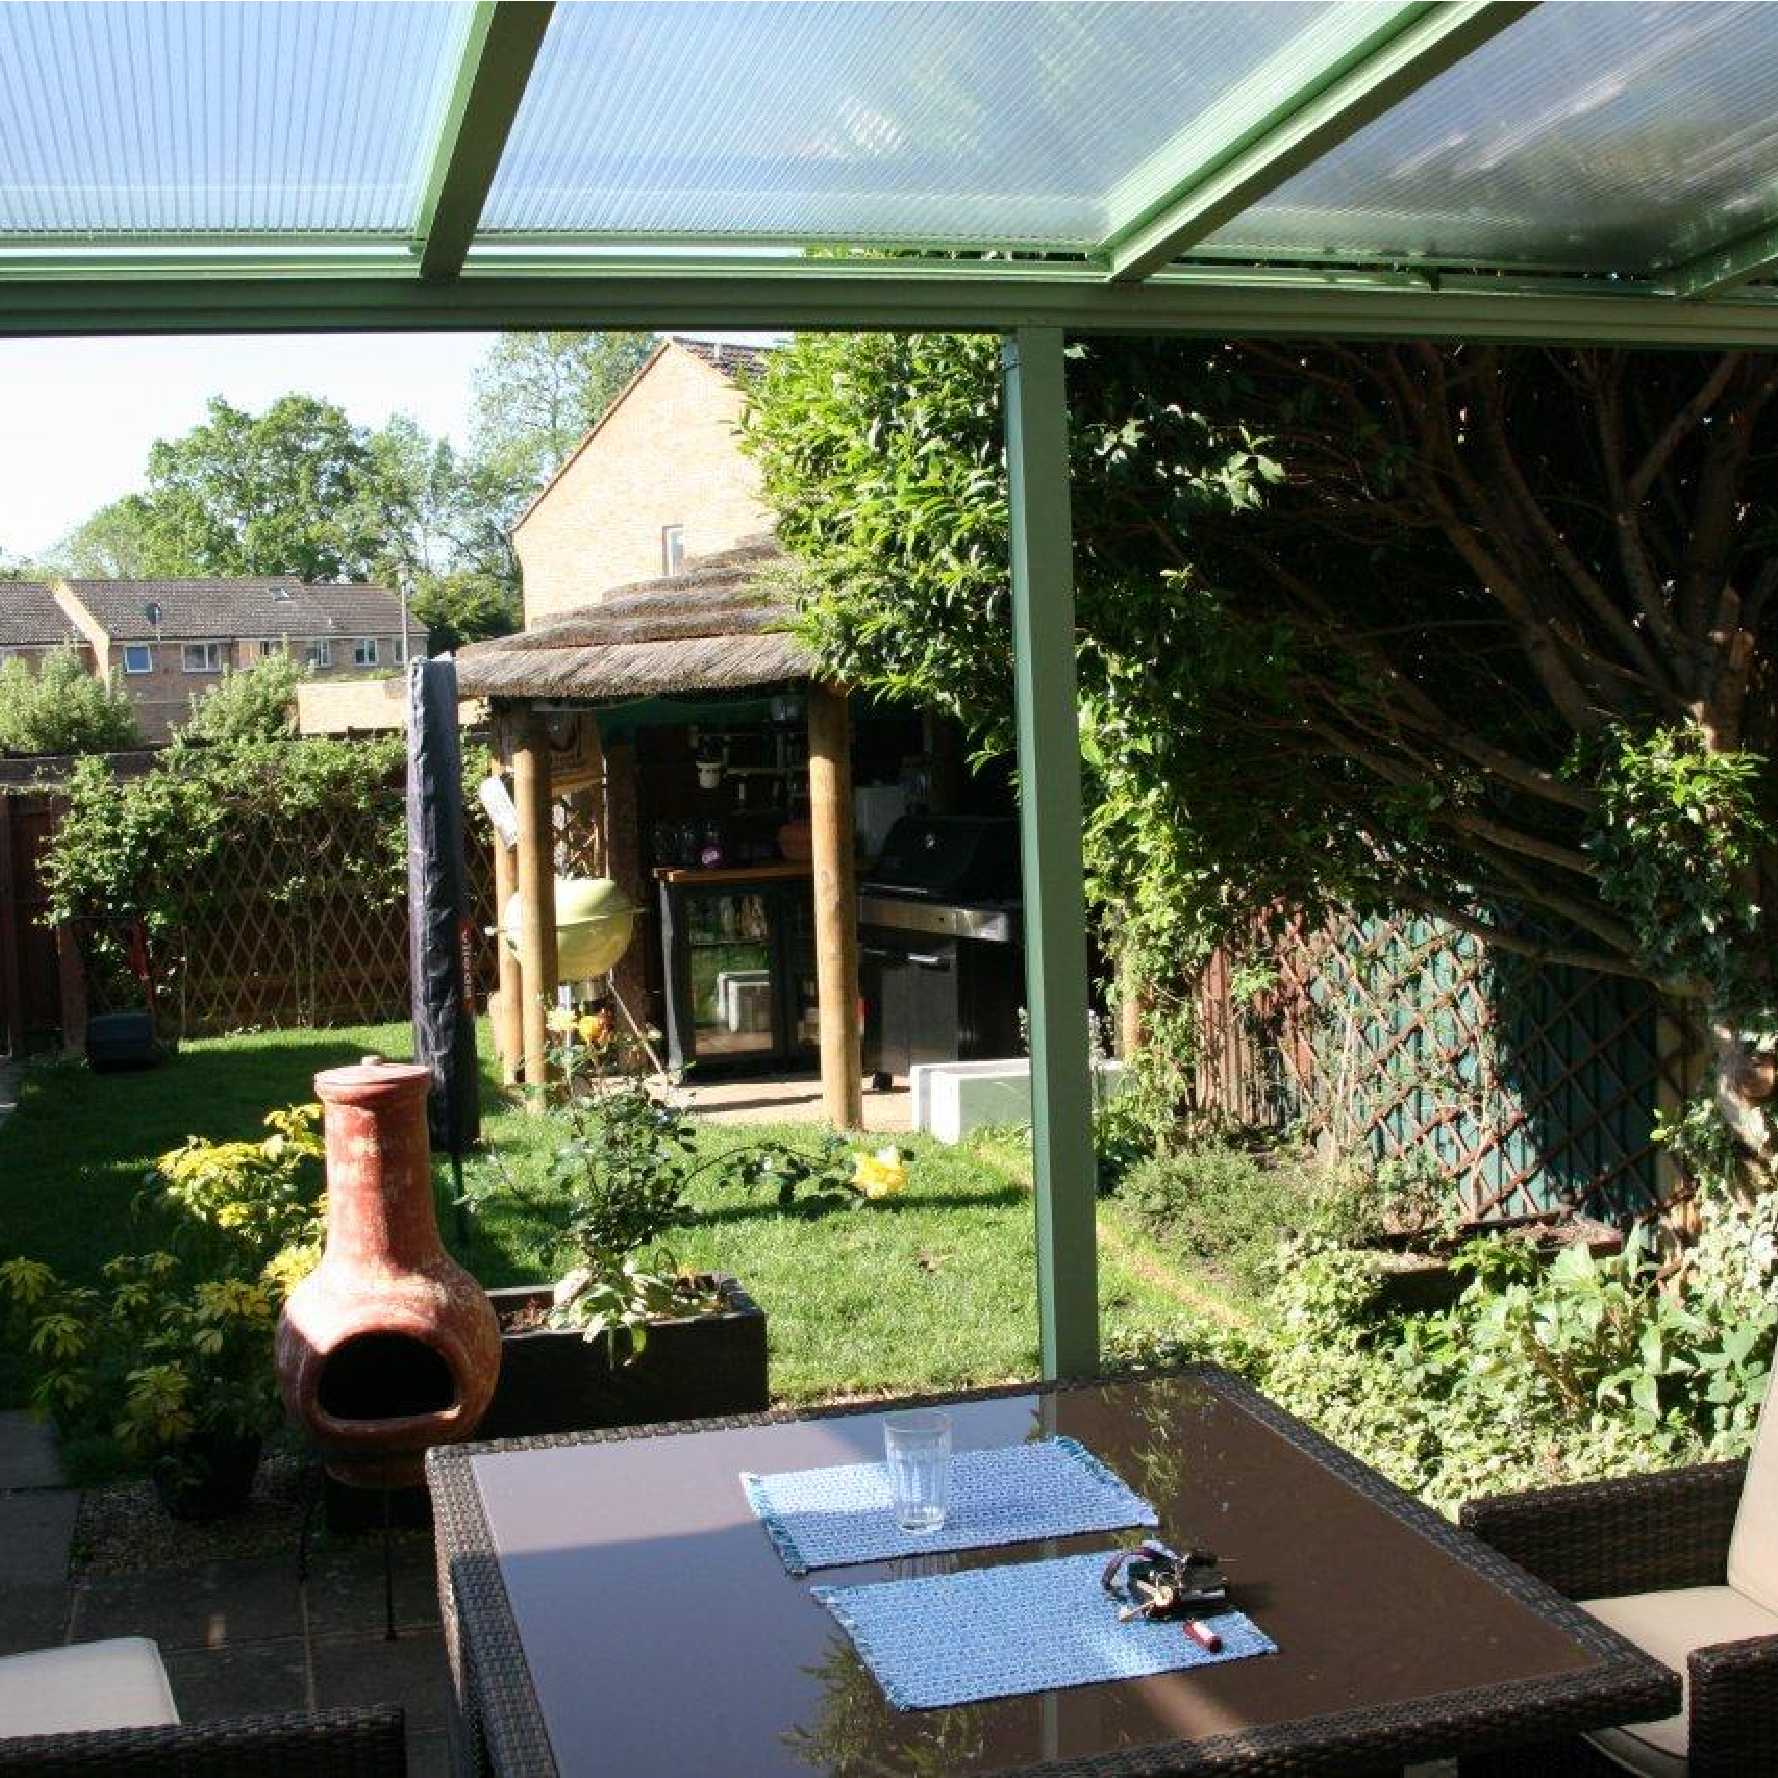 Affordable Omega Smart Lean-To Canopy, White with 16mm Polycarbonate Glazing - 10.7m (W) x 4.5m (P), (5) Supporting Posts